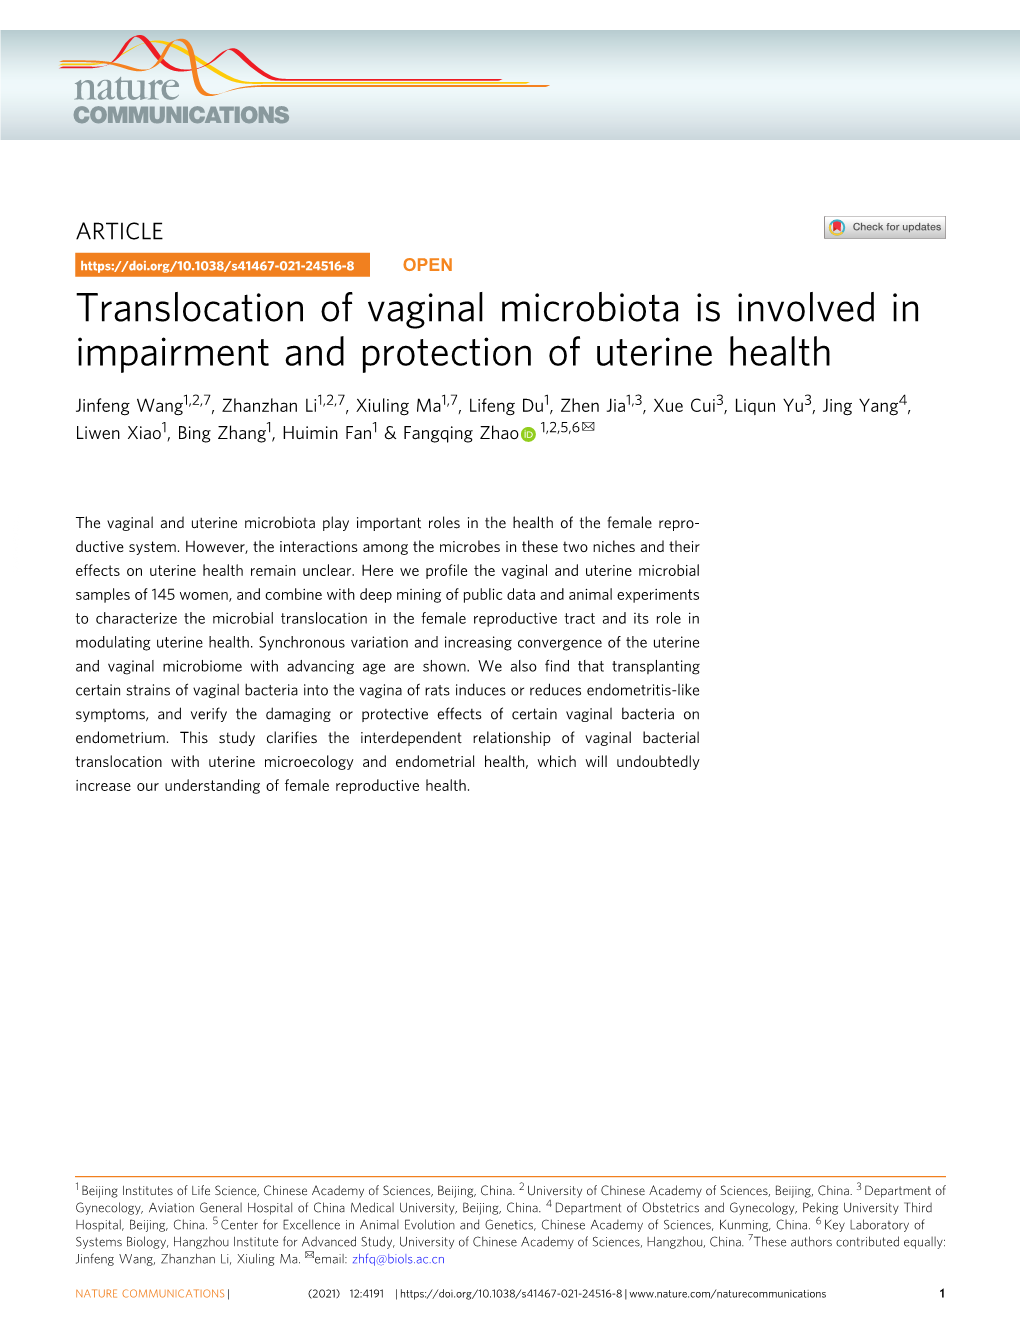 Translocation of Vaginal Microbiota Is Involved in Impairment and Protection of Uterine Health